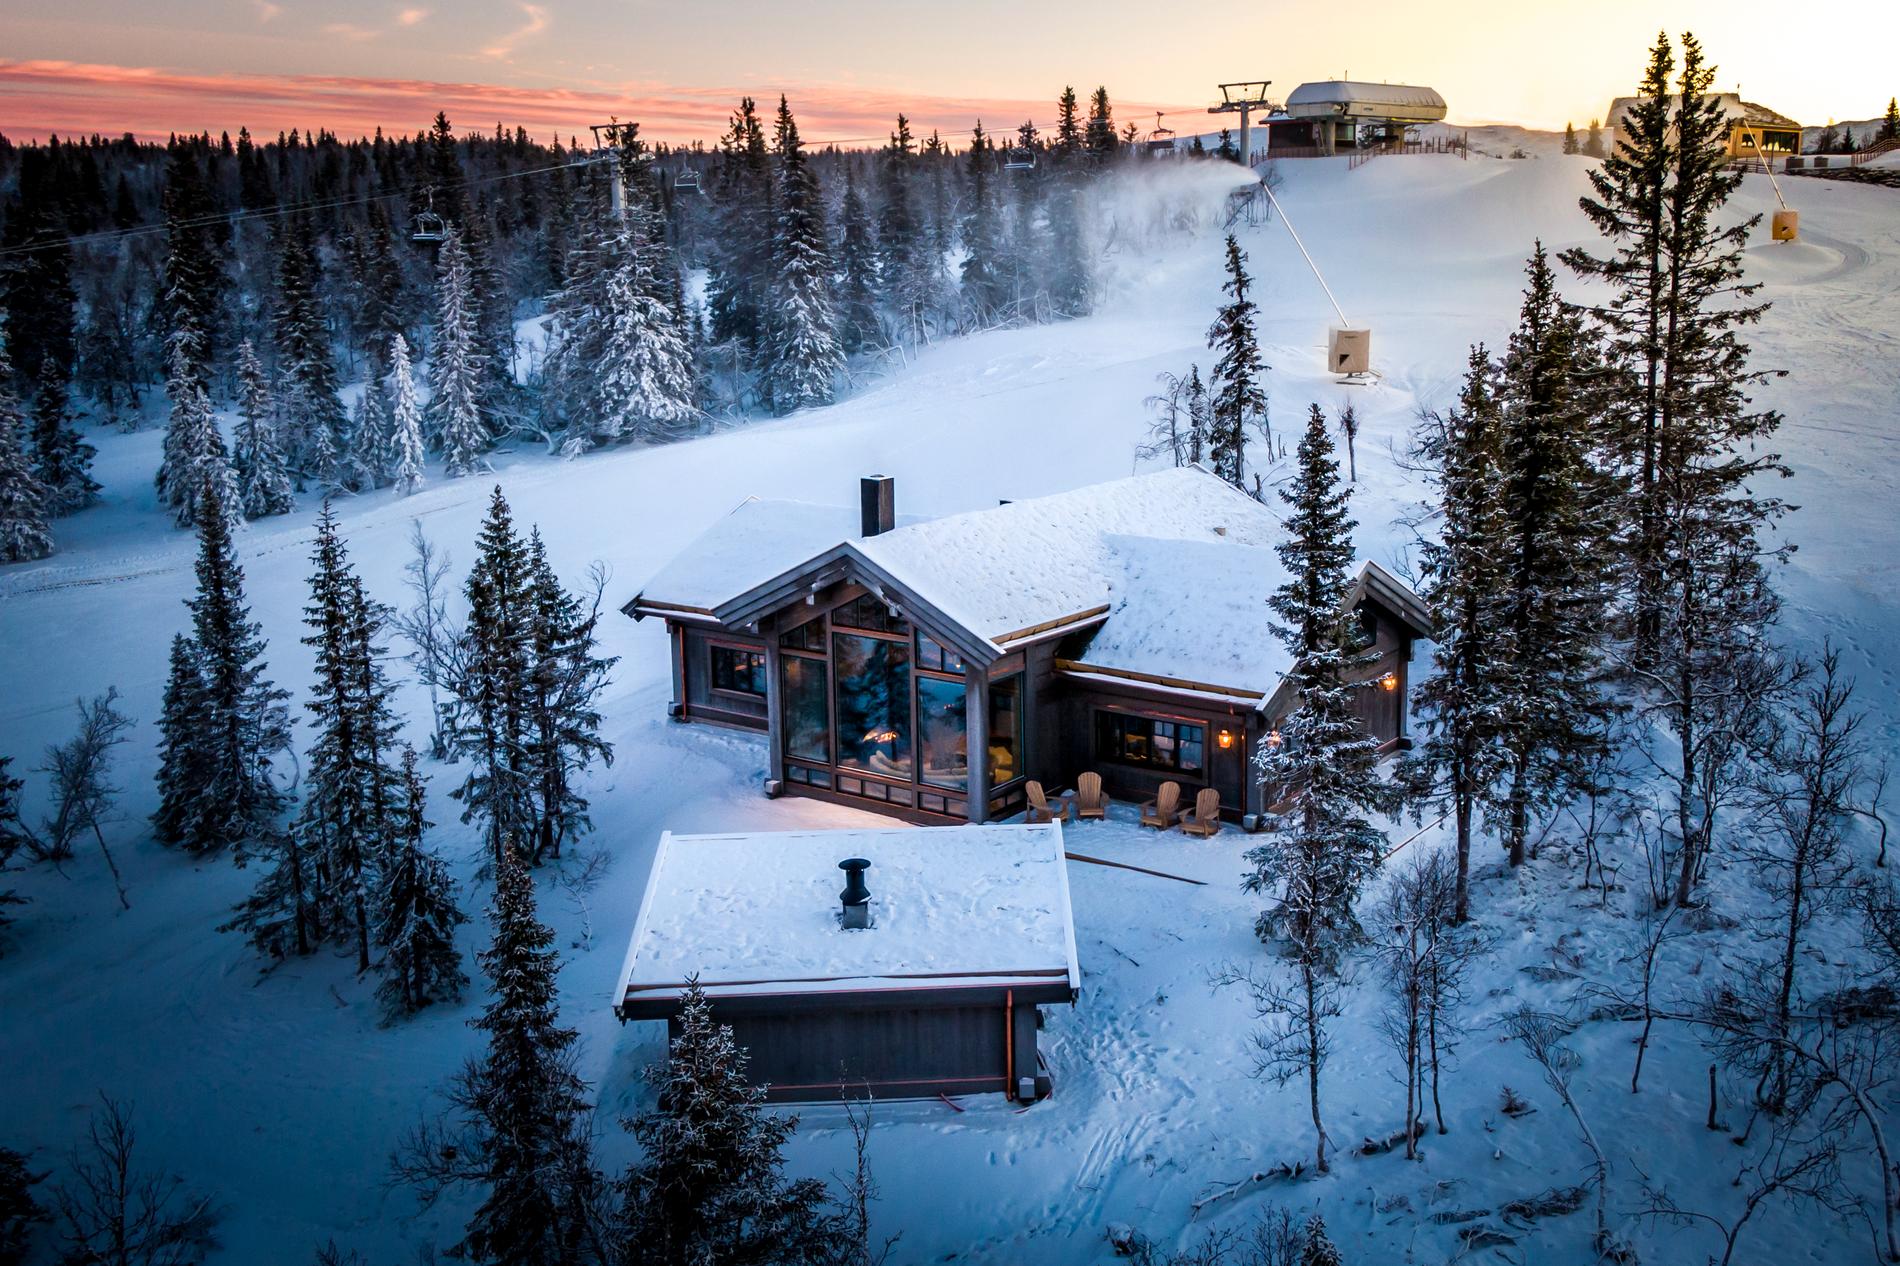 Selling a Cabin on Kvitfjell: How Going Abroad Helped Secure a NOK 33.5 Million Sale